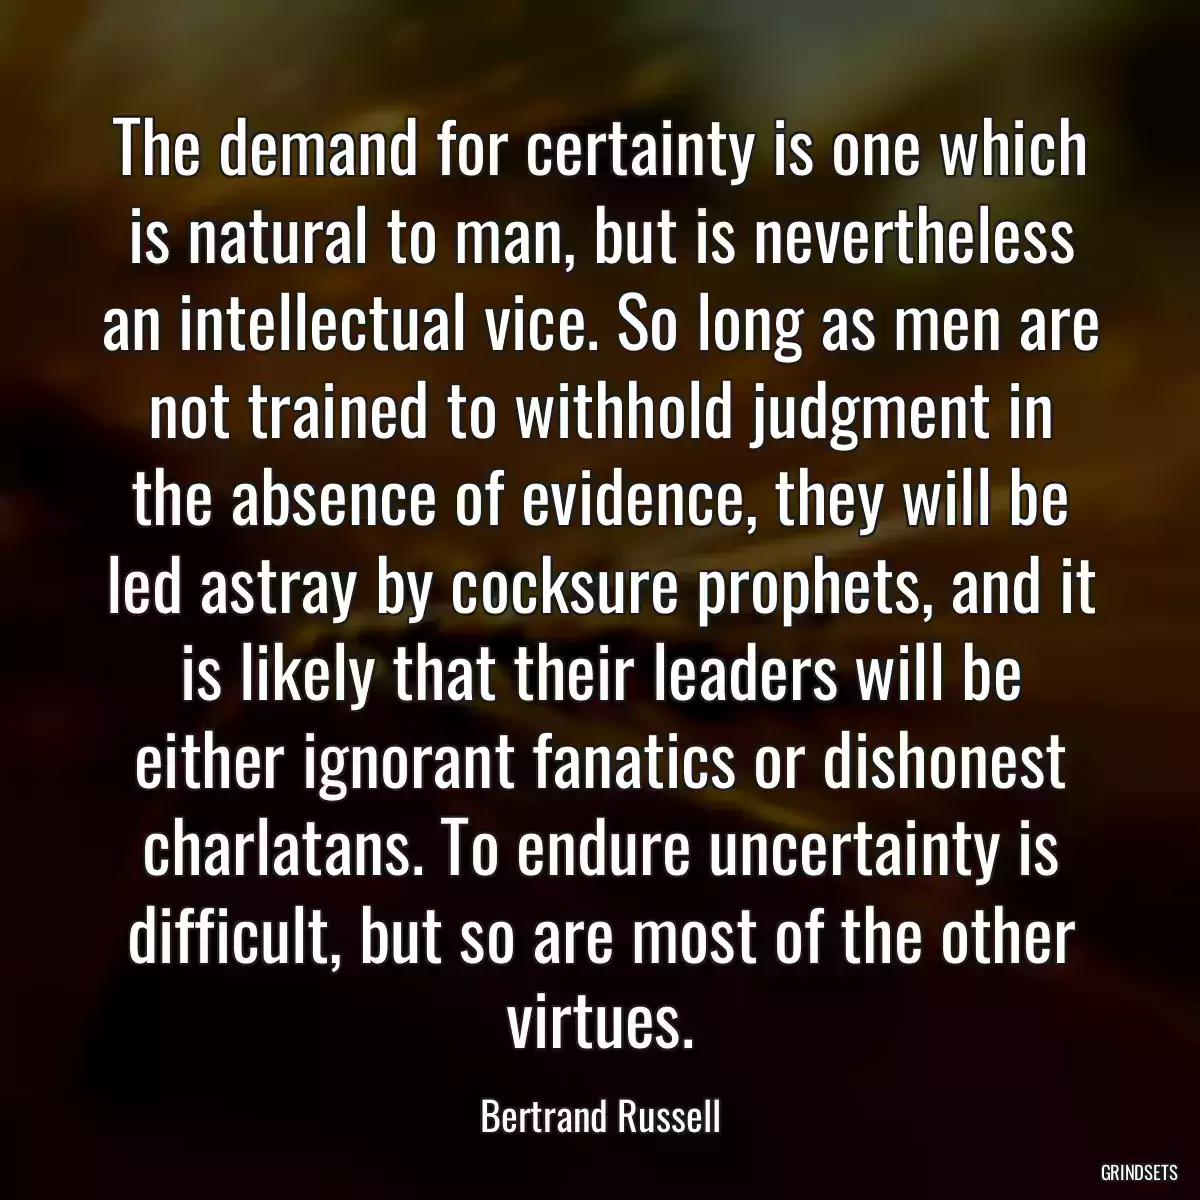 The demand for certainty is one which is natural to man, but is nevertheless an intellectual vice. So long as men are not trained to withhold judgment in the absence of evidence, they will be led astray by cocksure prophets, and it is likely that their leaders will be either ignorant fanatics or dishonest charlatans. To endure uncertainty is difficult, but so are most of the other virtues.